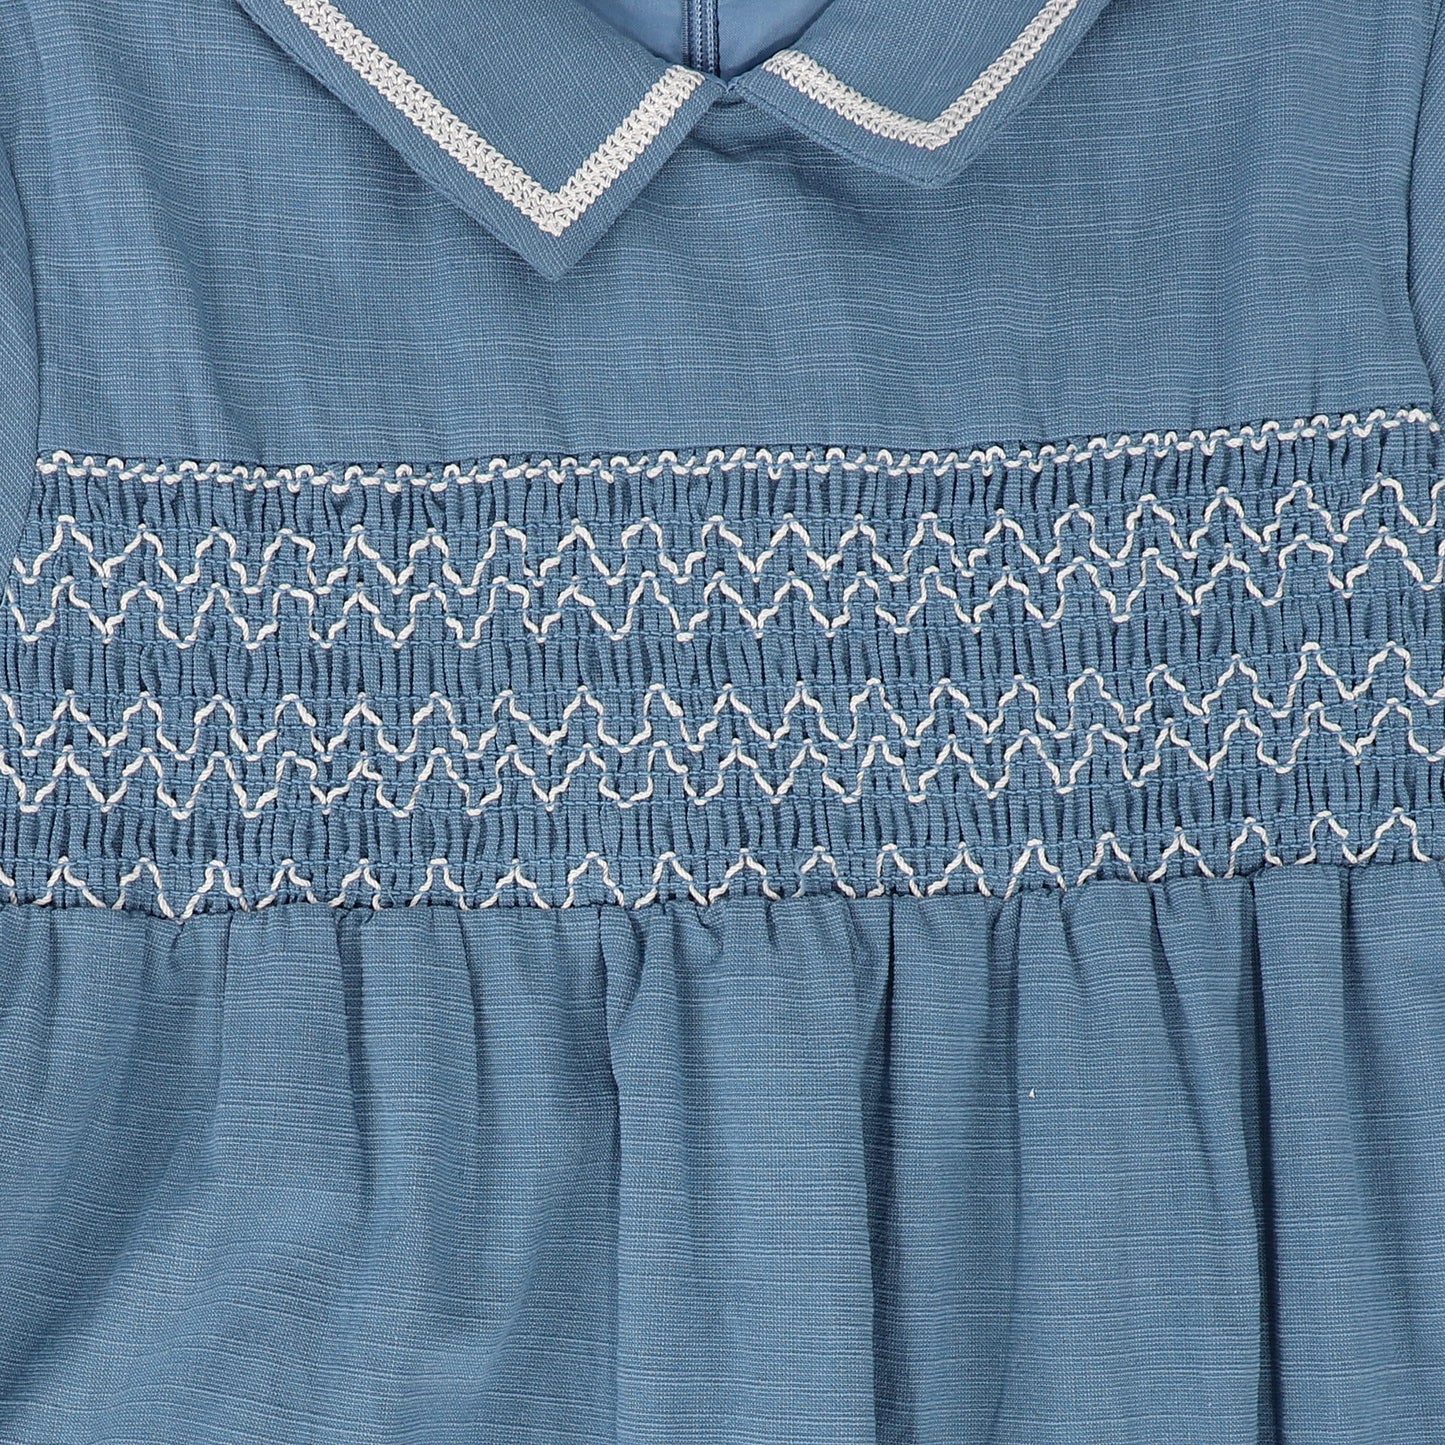 BACE COLLECTION BLUE SMOCKED COLLAR DRESS [FINAL SALE]